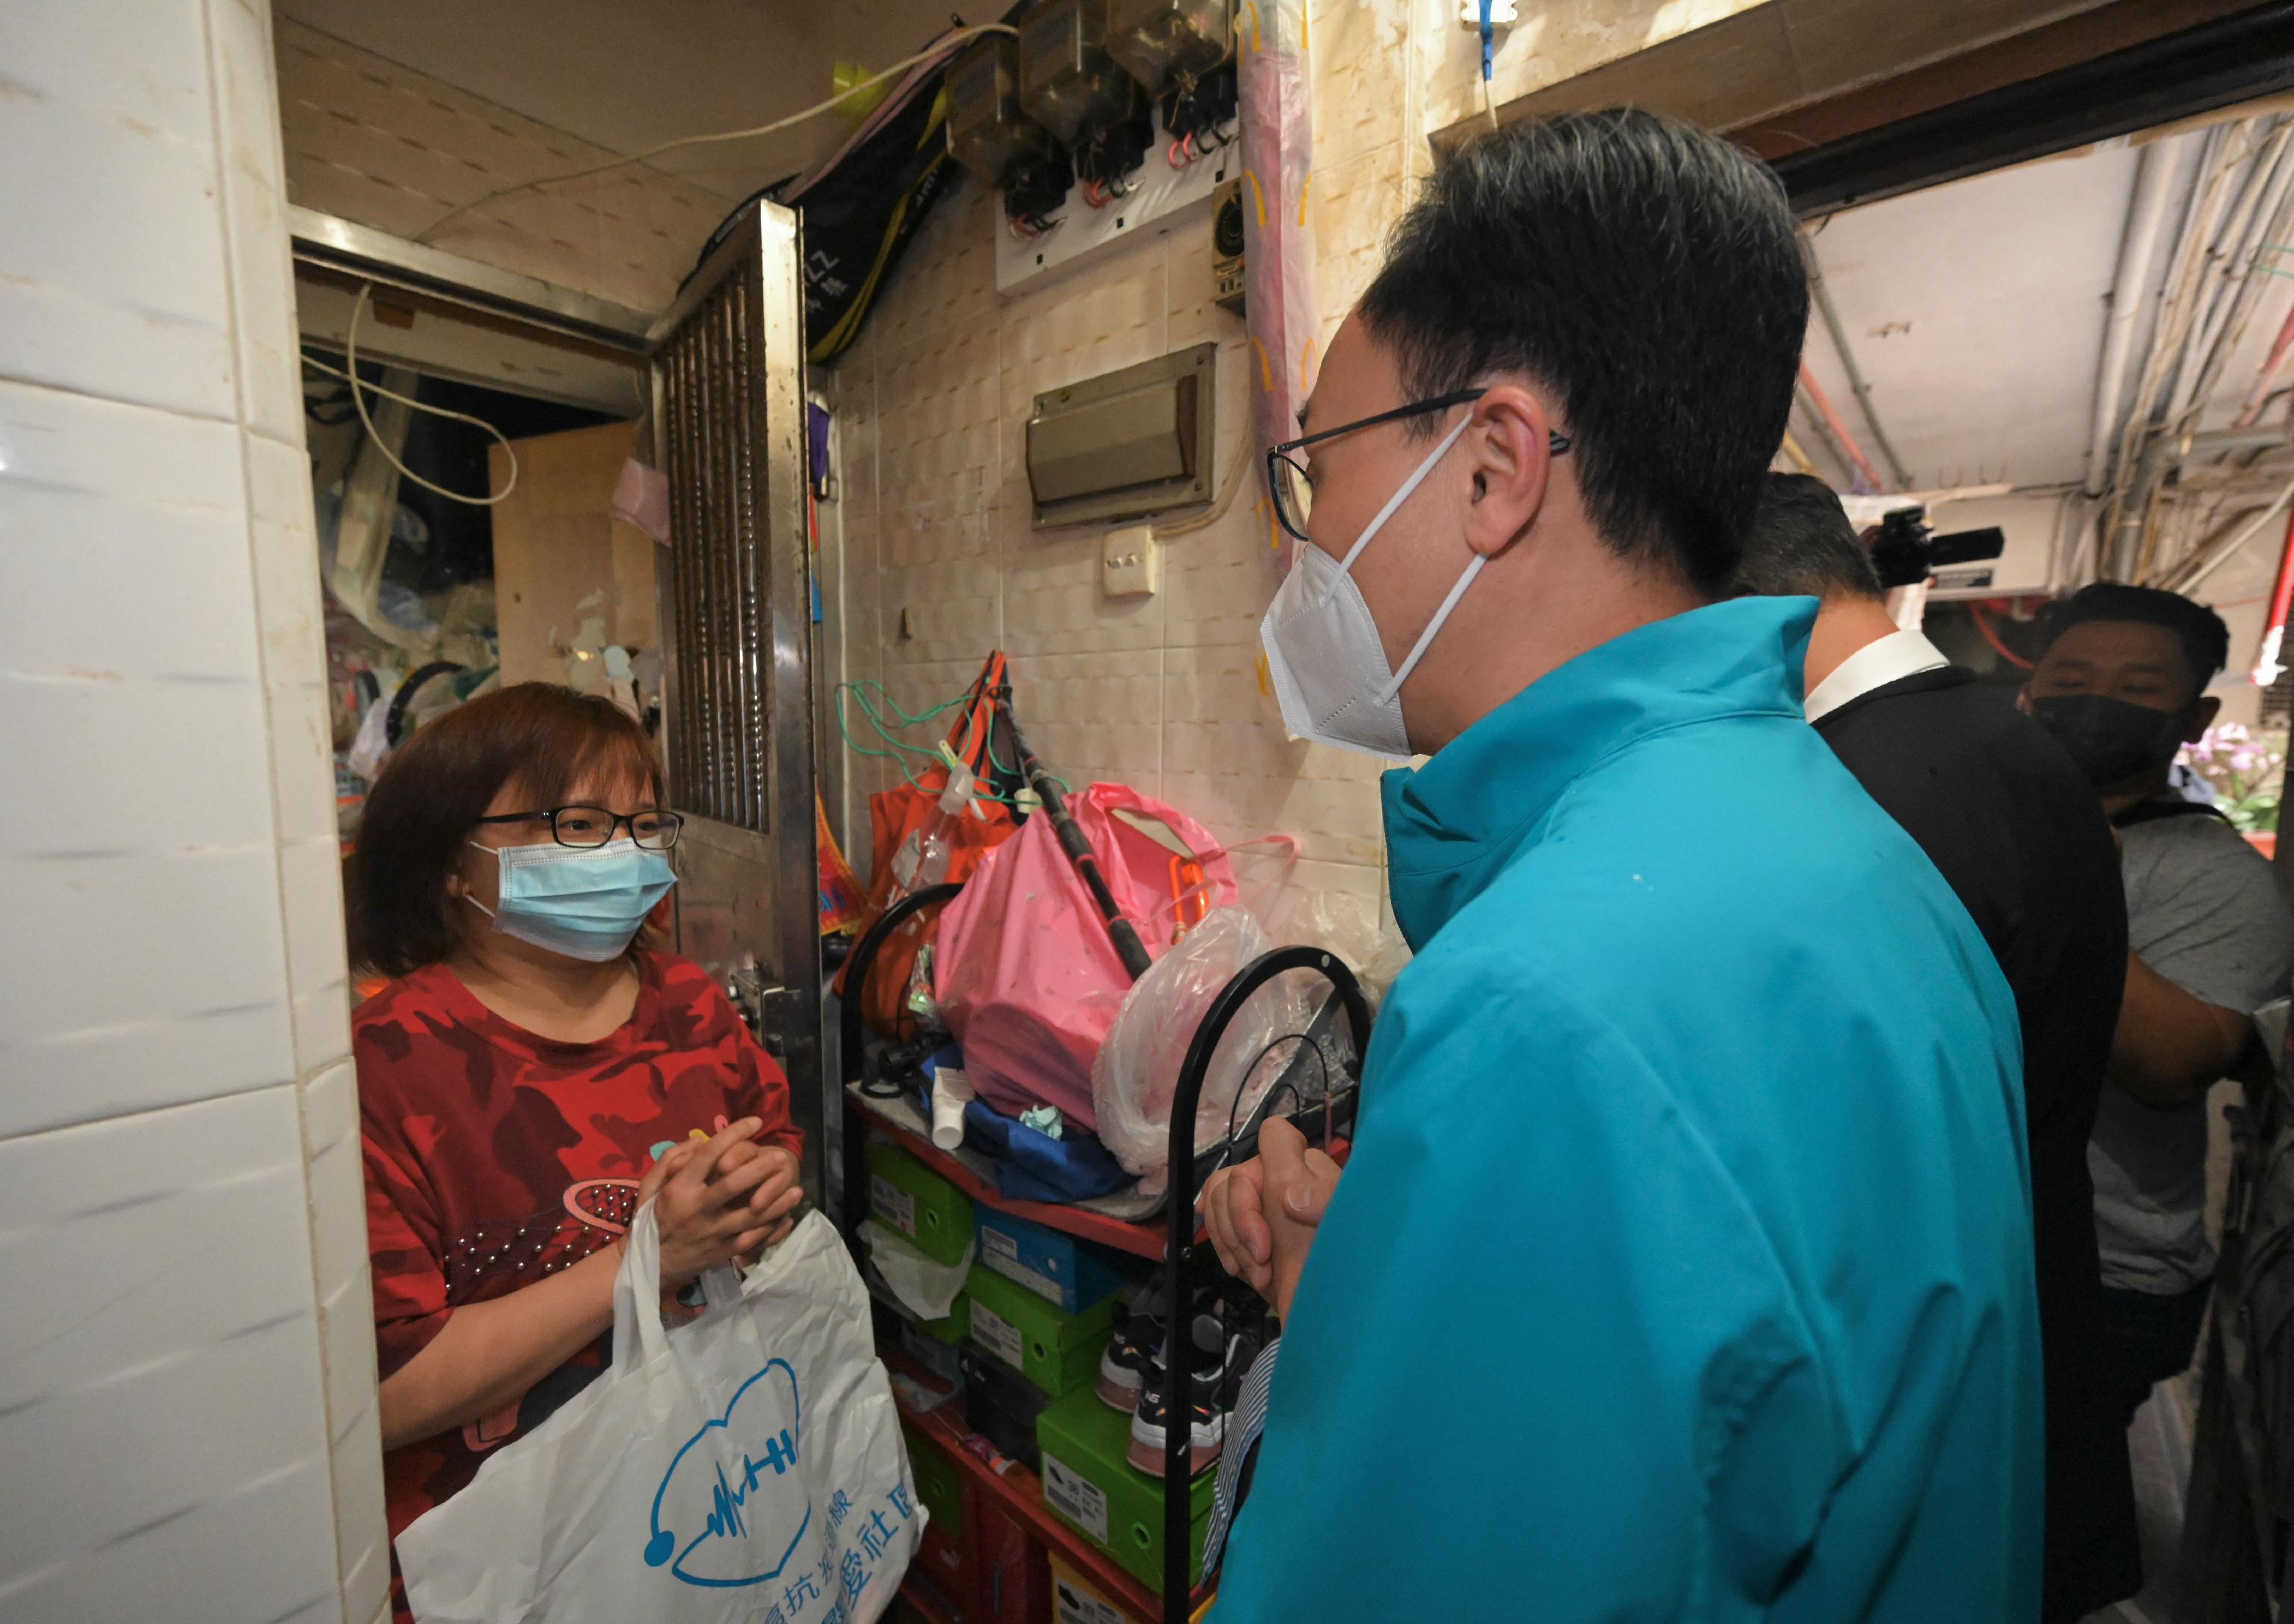 The Secretary for the Civil Service, Mr Patrick Nip, joined by a service team comprised of Administrative Officers, took part in an activity organised by the Hong Kong Community Anti-Coronavirus Link this morning (March 20) to distribute anti-epidemic supplies to the needy households in Kowloon City District and to learn about their needs. Picture shows Mr Nip (right) delivering the supplies to the needy.